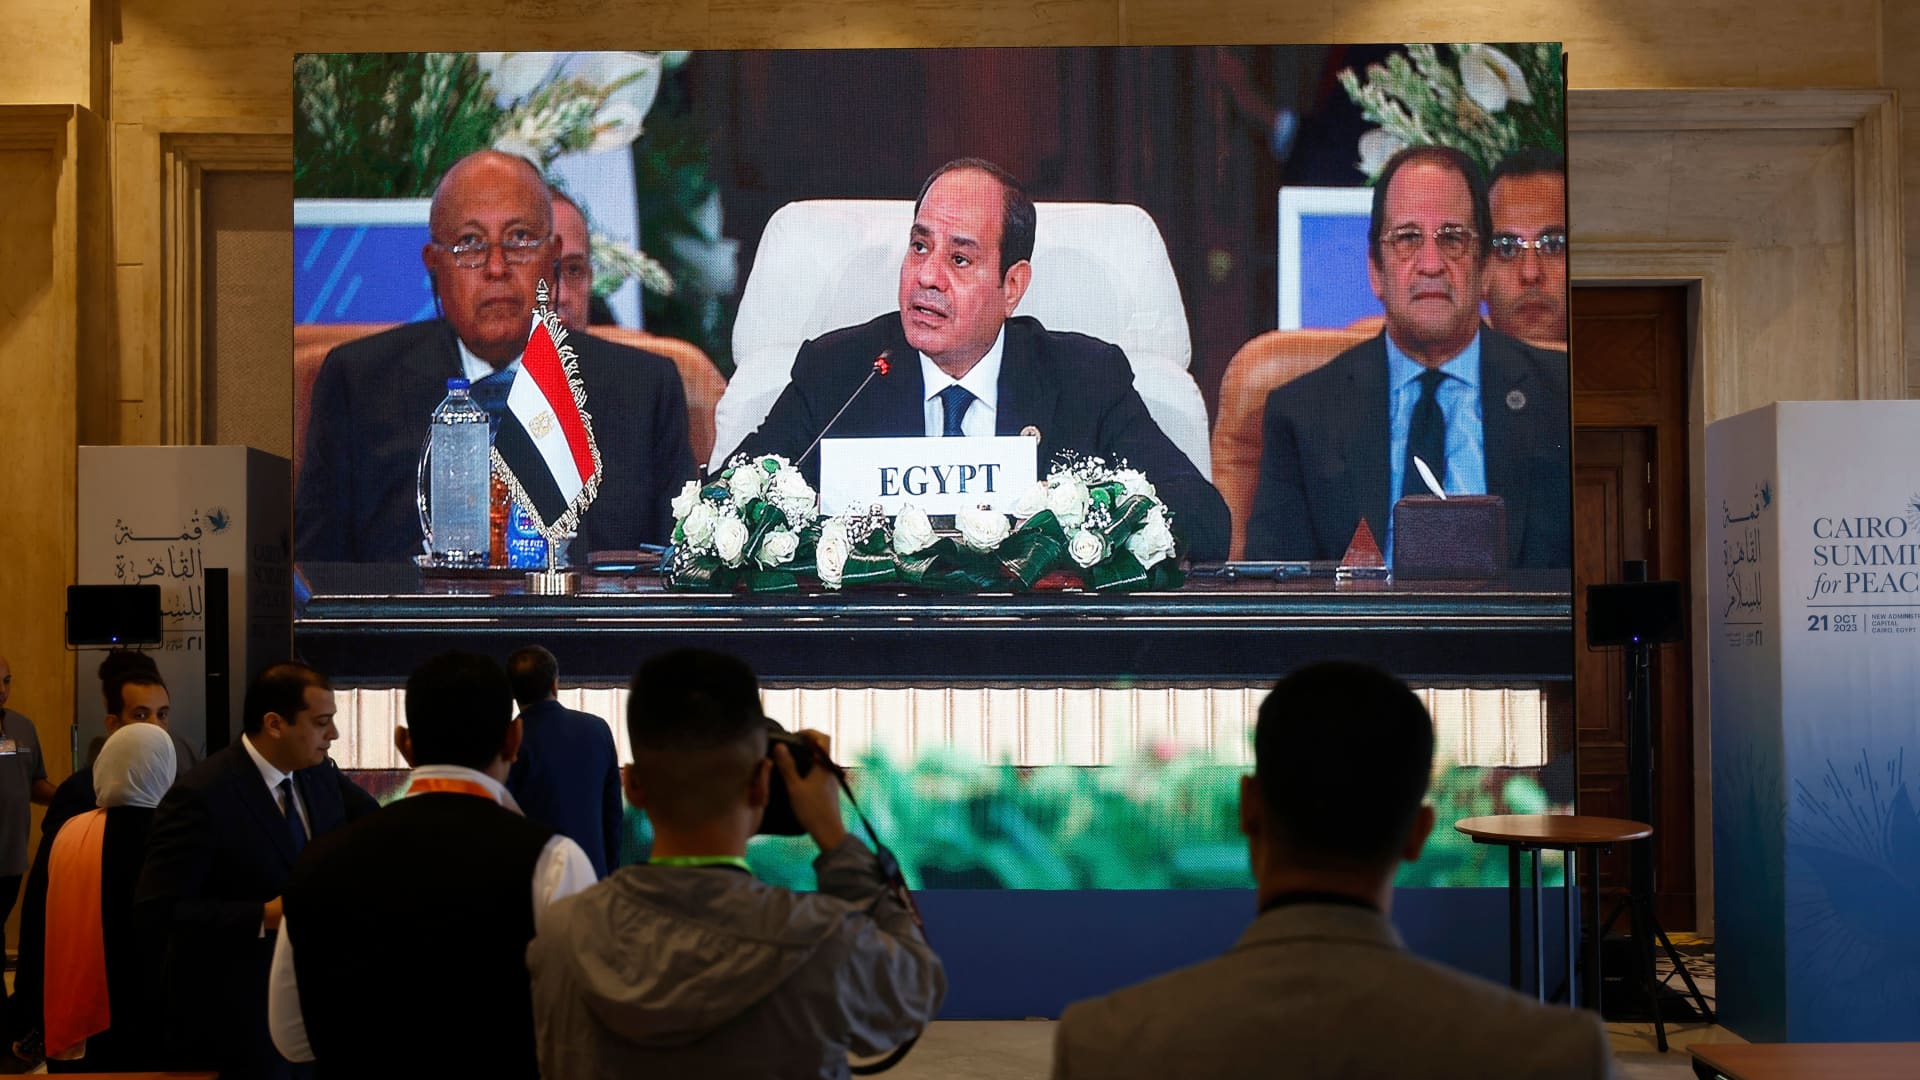 Seen on a large screen the Egyptian President Abdel-Fattah al-Sisi opens the International Peace Summit in Cairo on October 21, 2023, amid the ongoing battles between Israel and the Palestinian group Hamas.